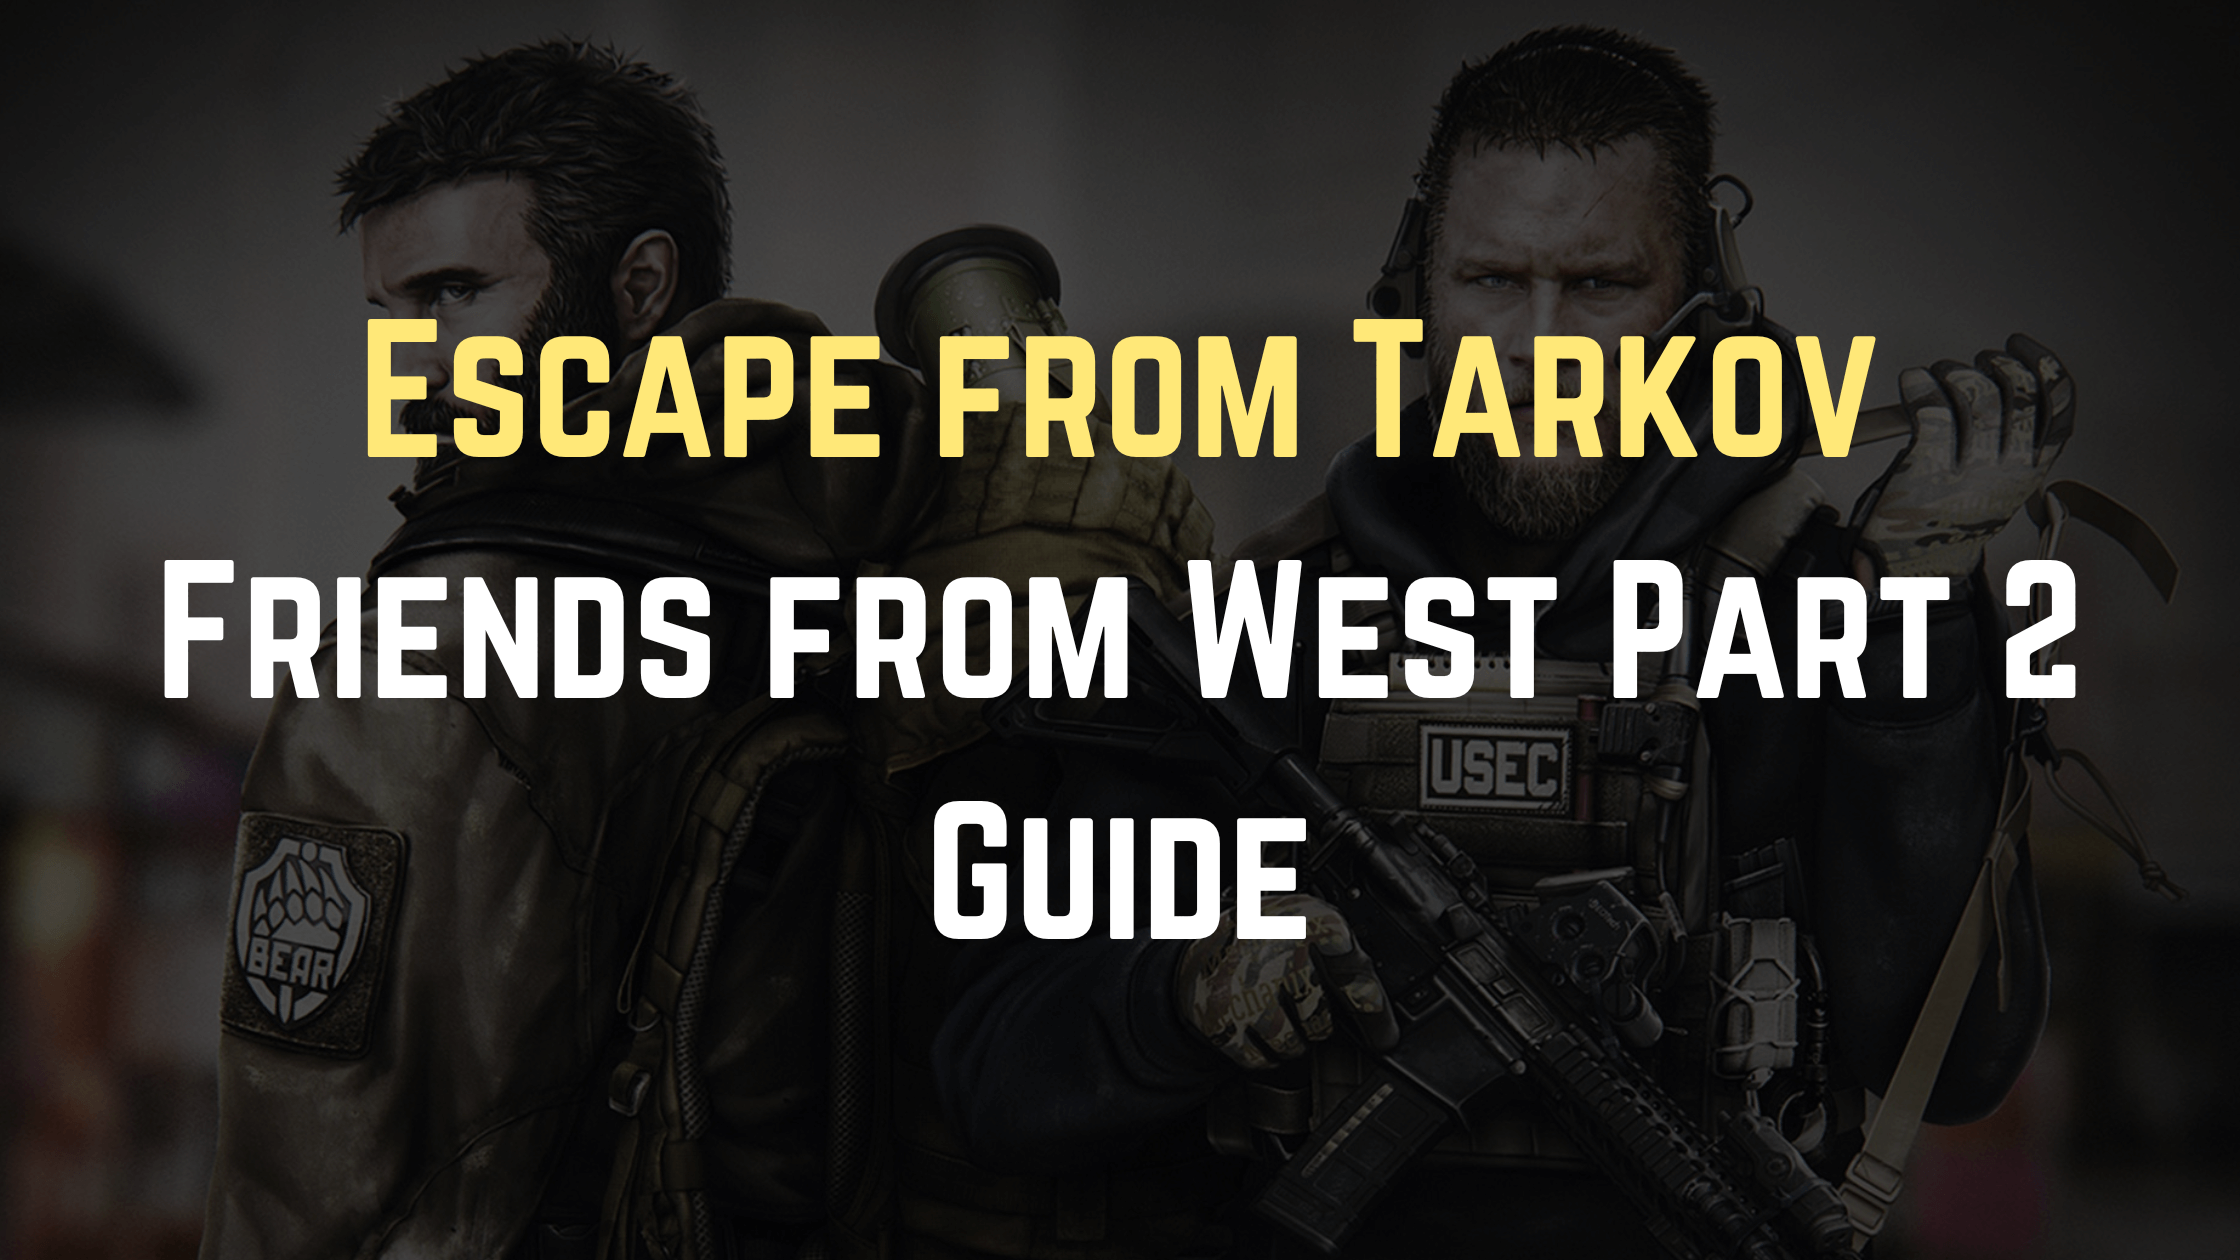 Friends from West Part 2 guide